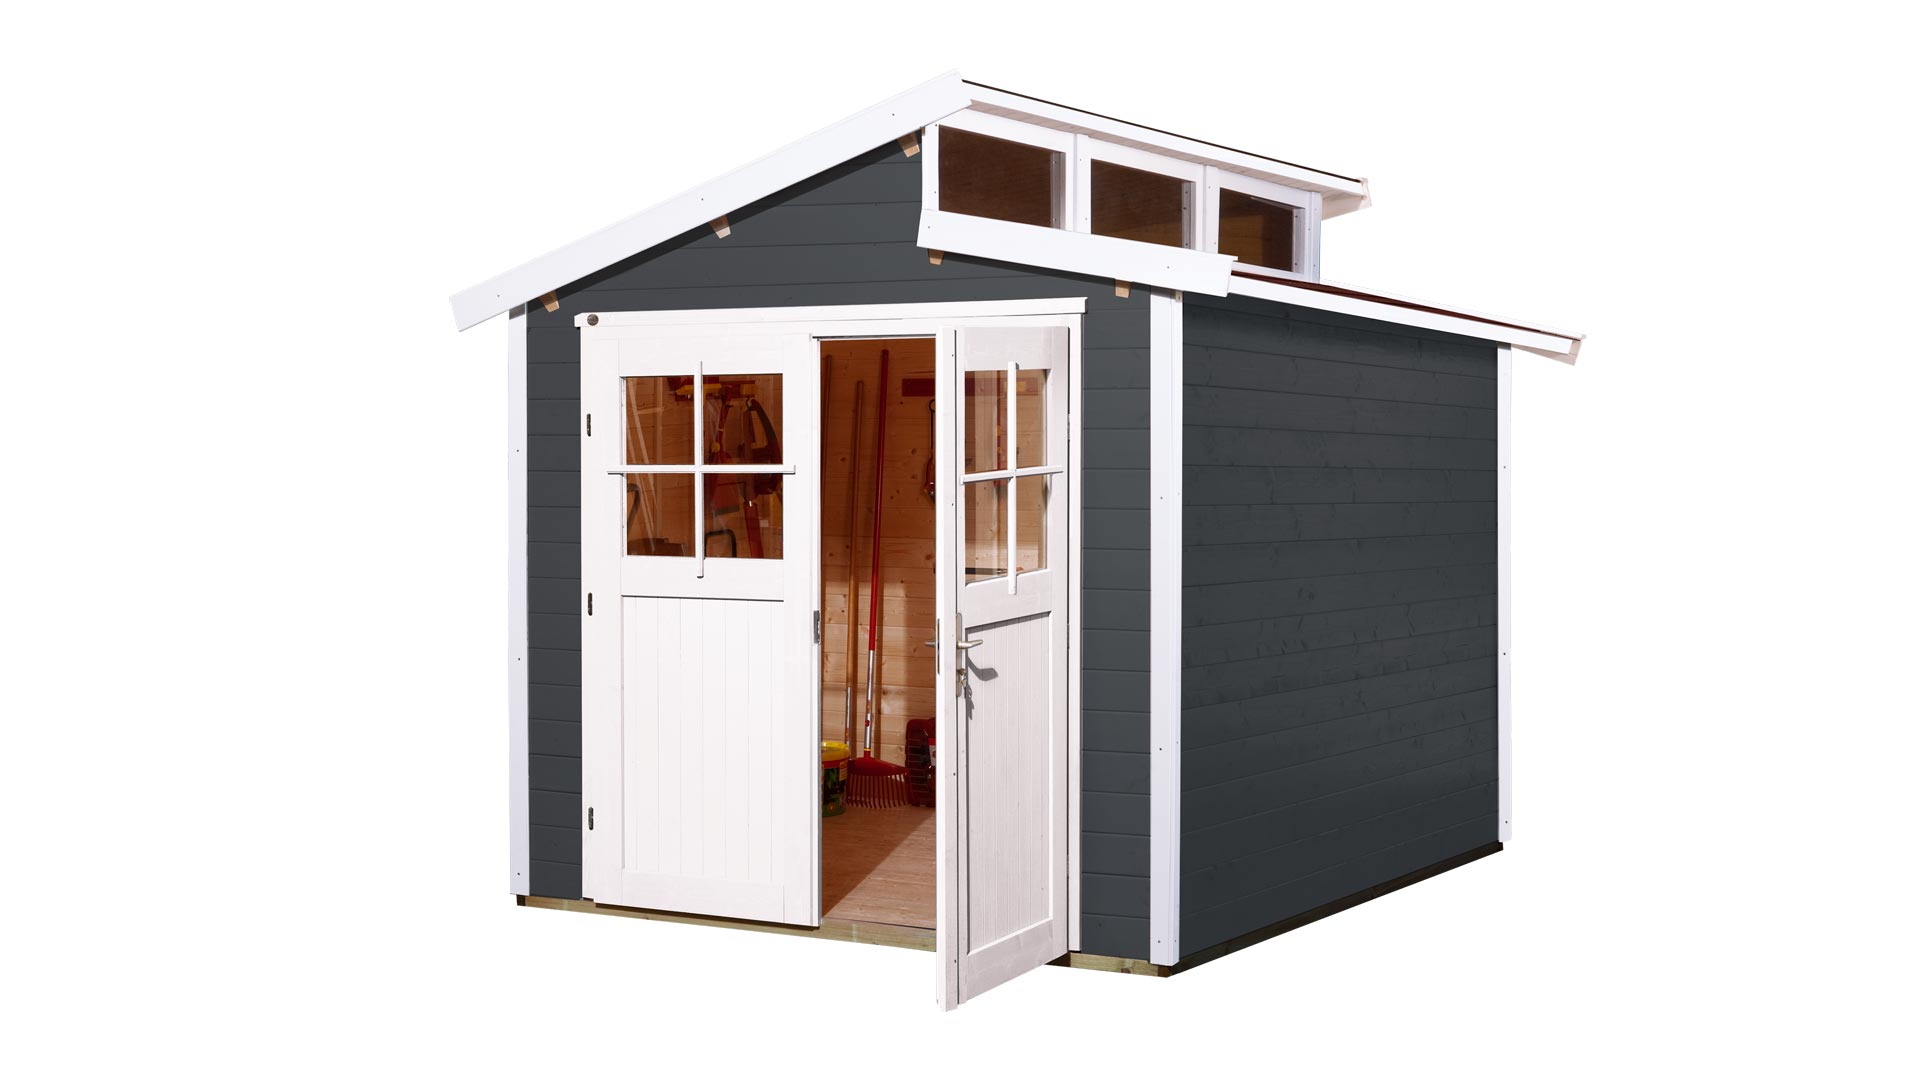 Weka offset an shape Heavenly roof 226 model with Garden Shed -